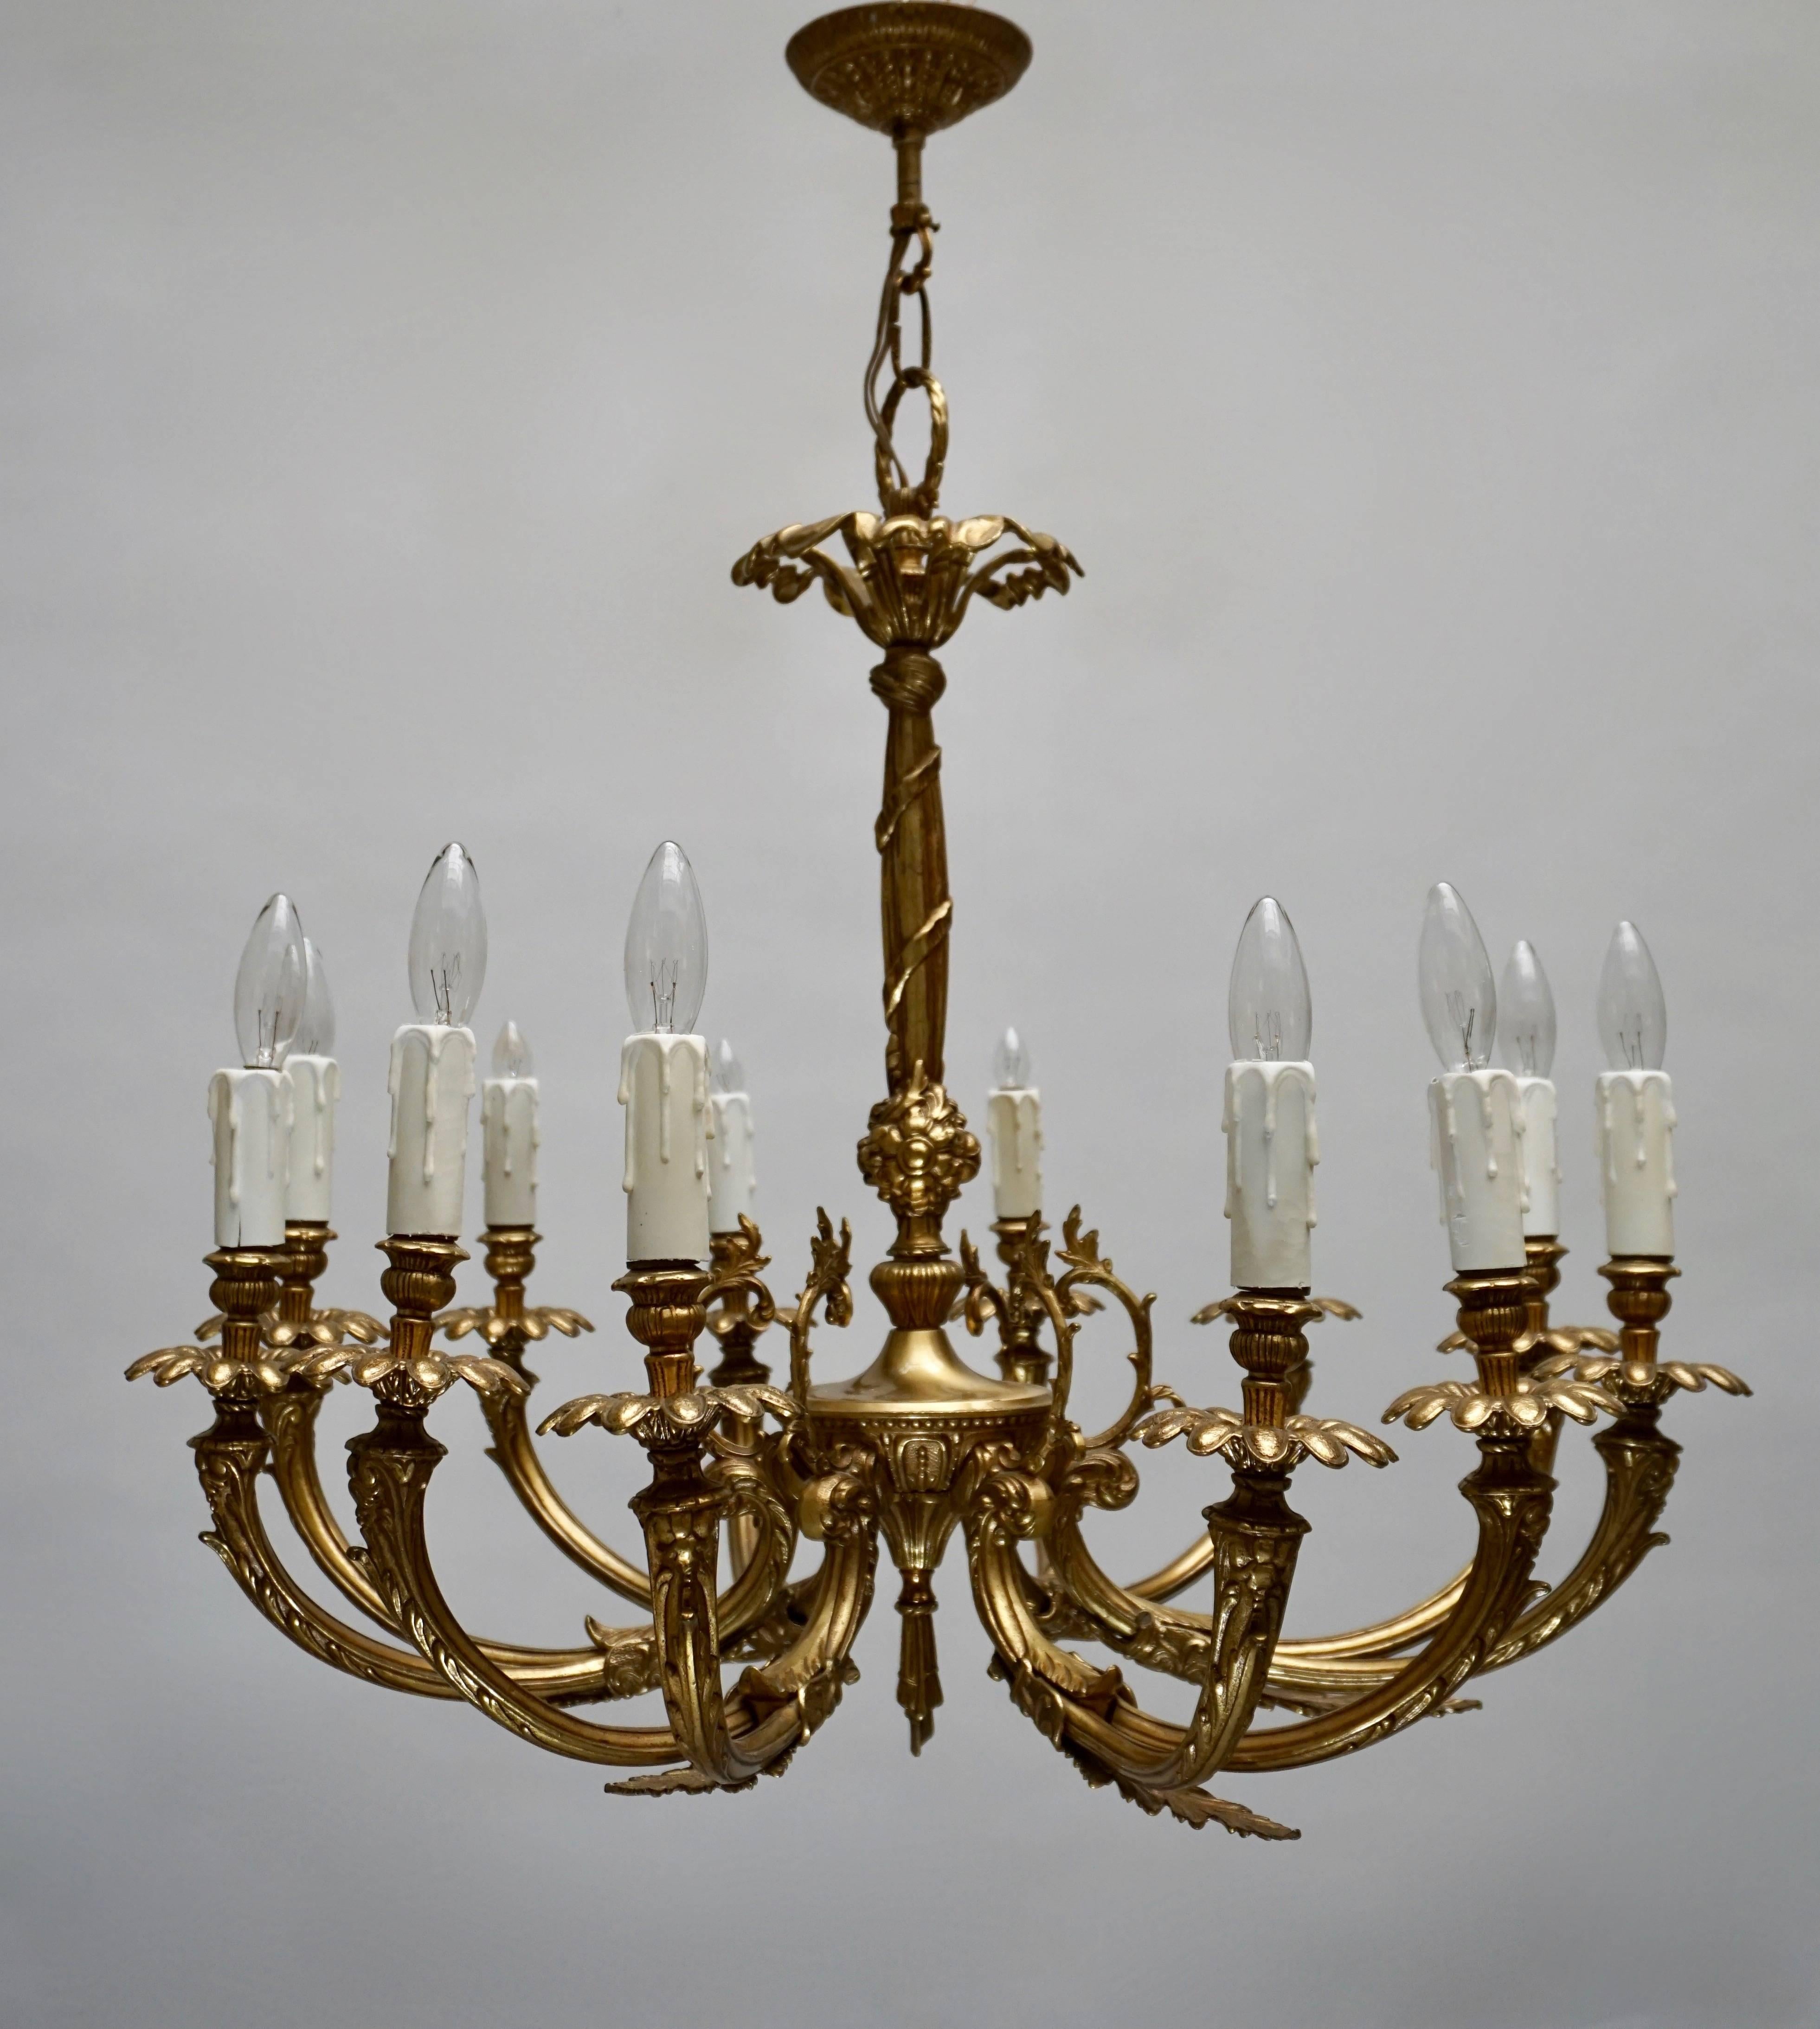 A French style 12-arm brass chandelier with cast leaves and floral decoration.

Diameter: 58 cm.
Height fixture: 65 cm
Total height with chain: 80 cm.
 